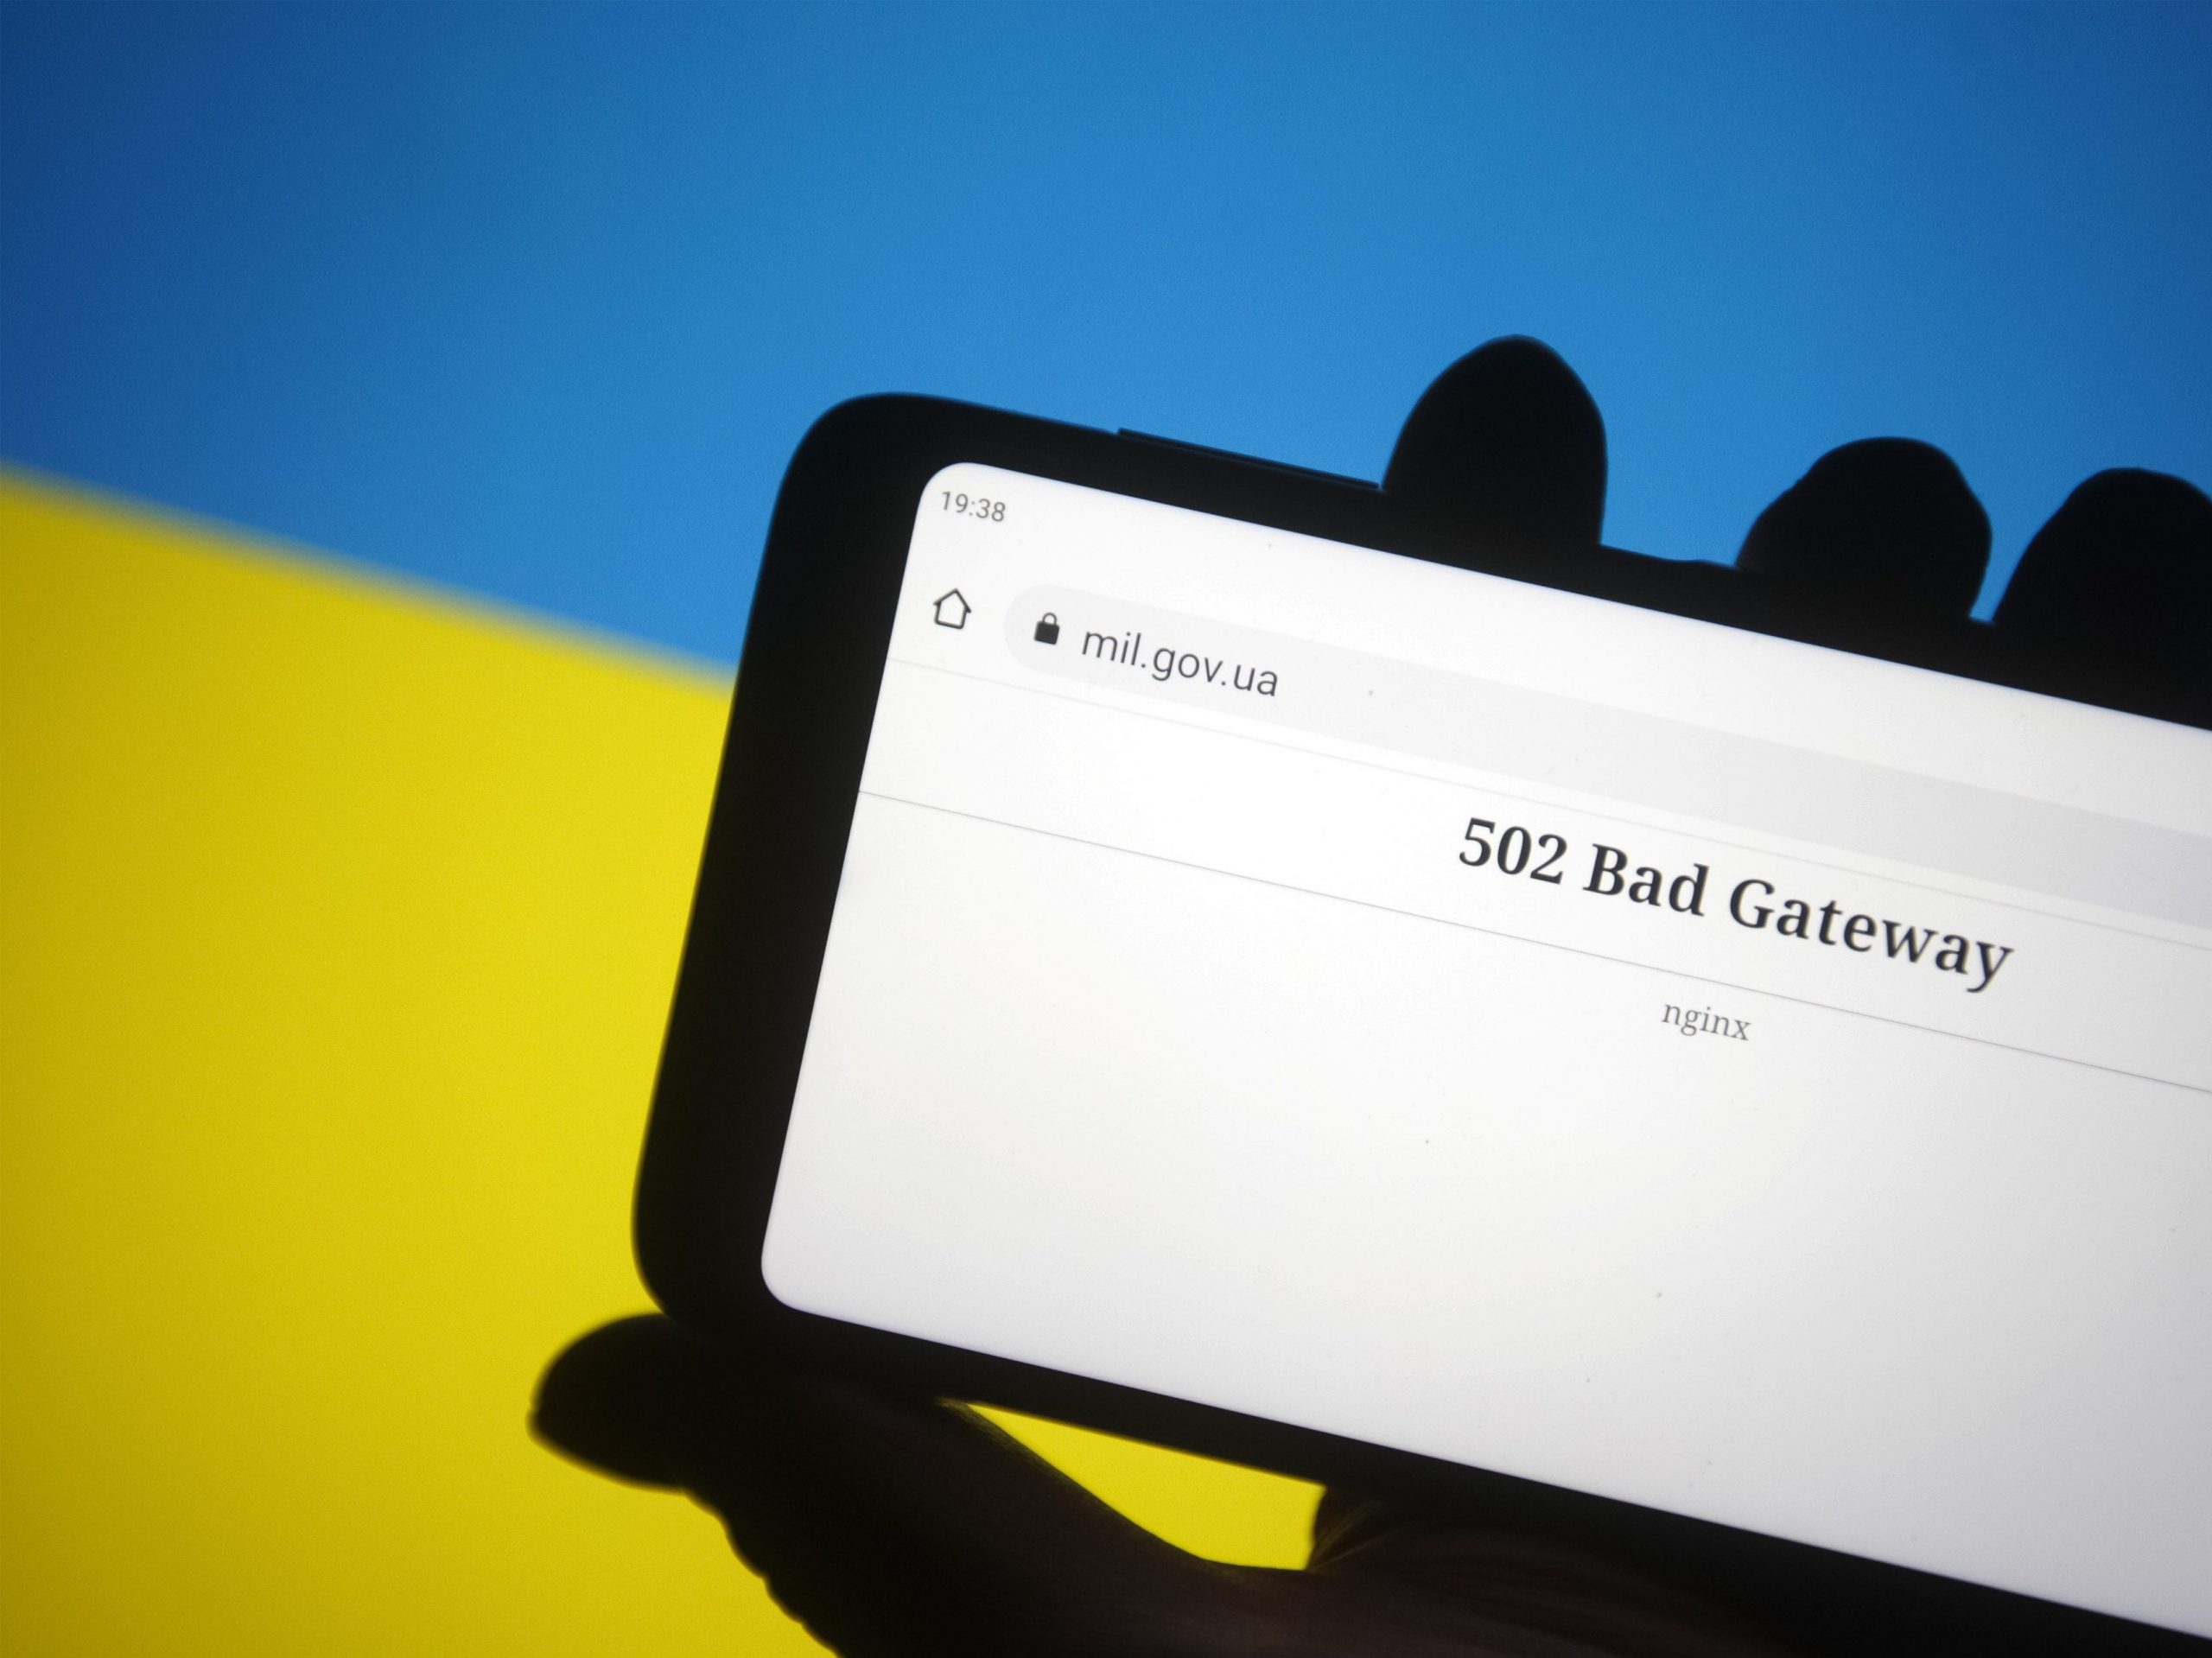 The 502 Bad Gateway message is seen on Ministry of Defence of Ukraine official webpage displayed on a smartphone screen and flag of Ukraine in the background.